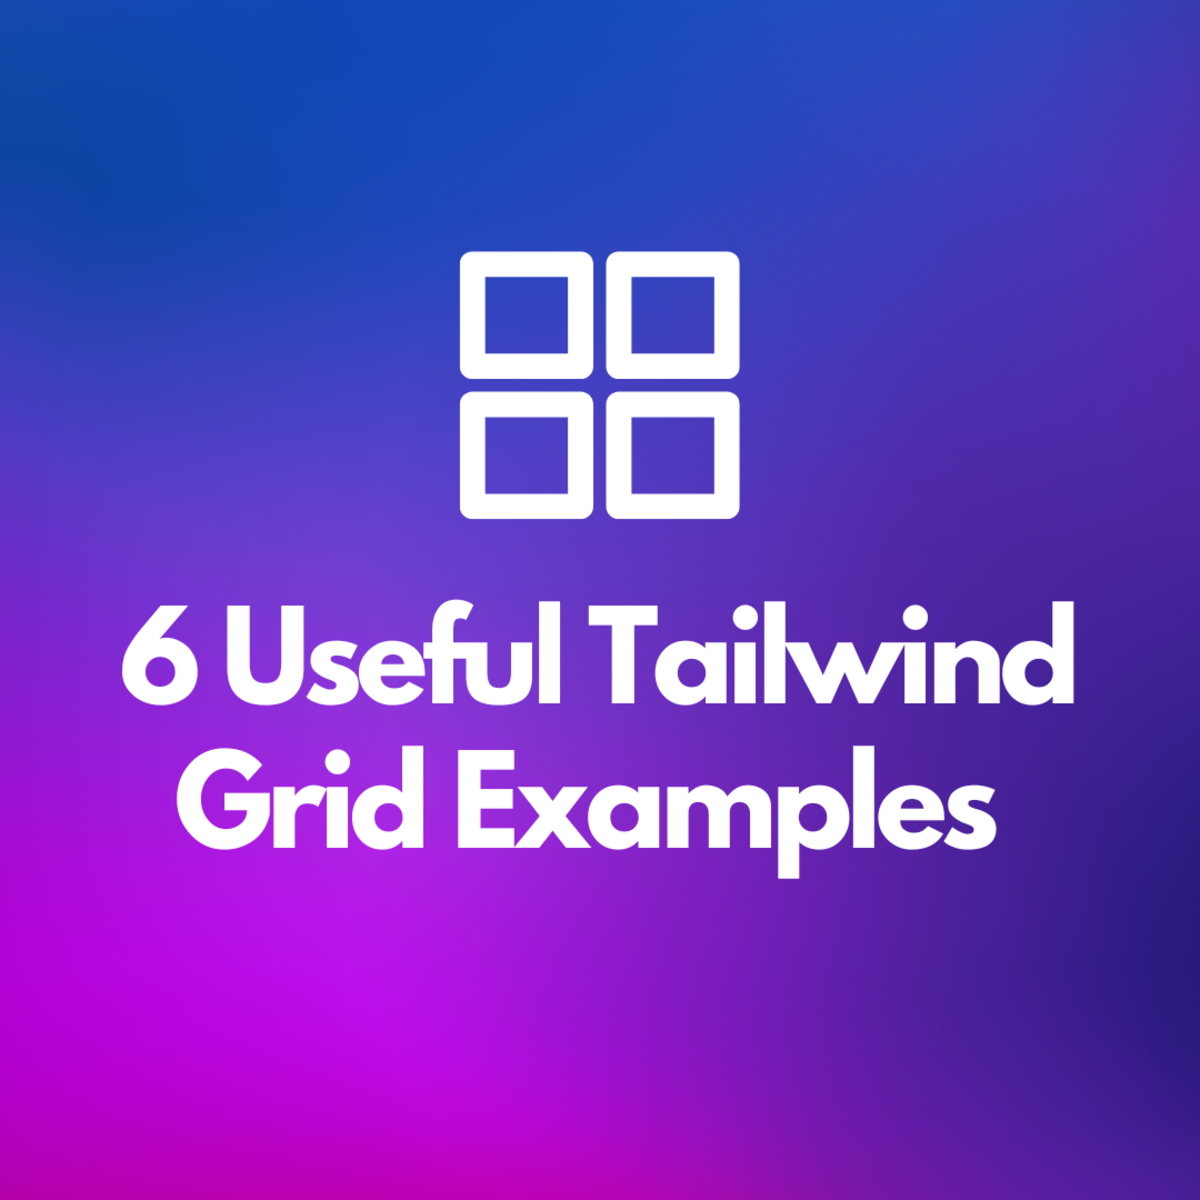 6 Useful Tailwind Grid Examples to Check Out (With Code Snippets)